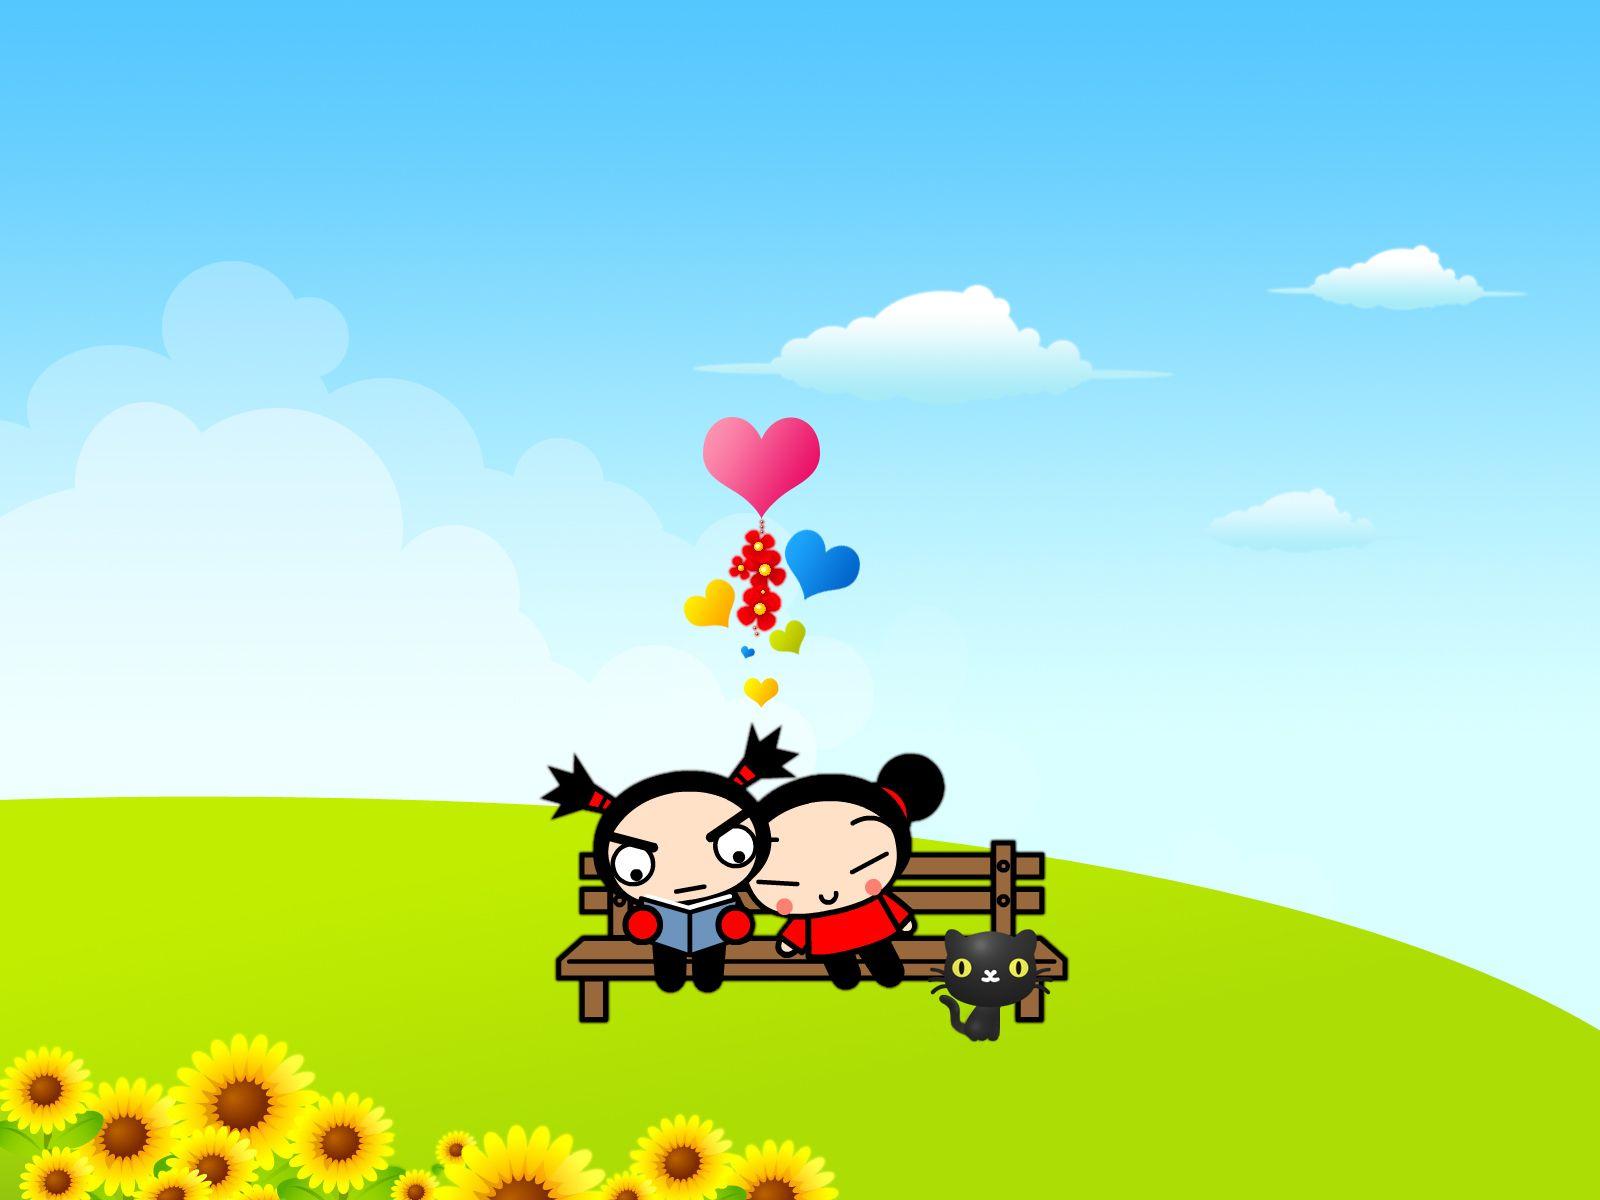 image about Pucca and Garu. See more about pucca